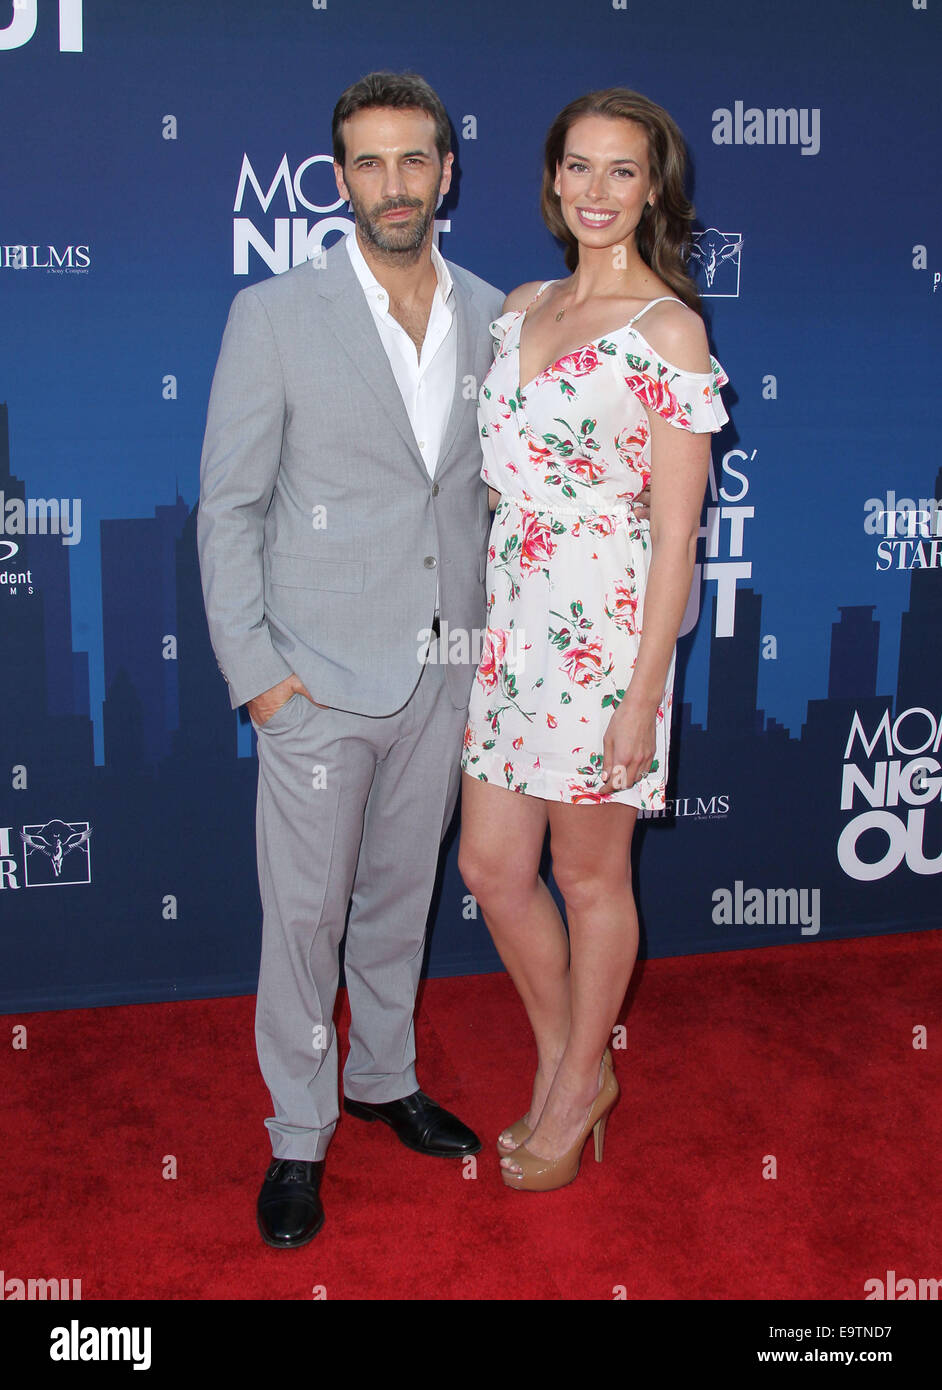 Premiere of 'Mom's Night Out' held at the TCL Chinese Theatre IMAX - Arrivals  Featuring: J.R. Cacia,Malea Mitchell Where: Los Angeles, California, United States When: 29 Apr 2014 Stock Photo